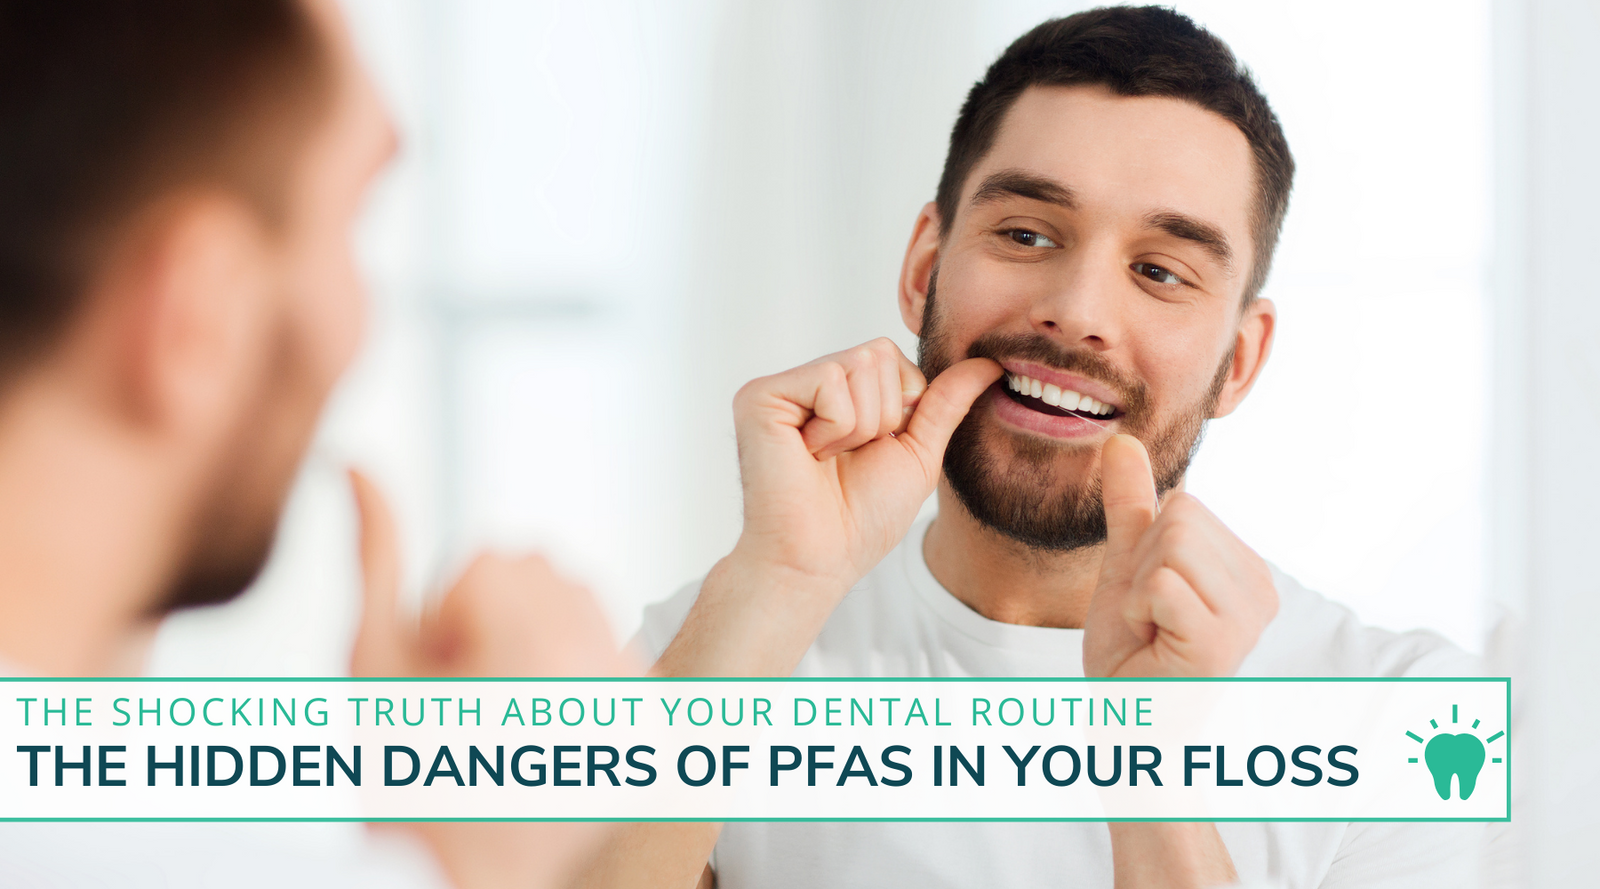 The Shocking Truth About Your Dental Routine: The Hidden Dangers of PFAS in Your Floss